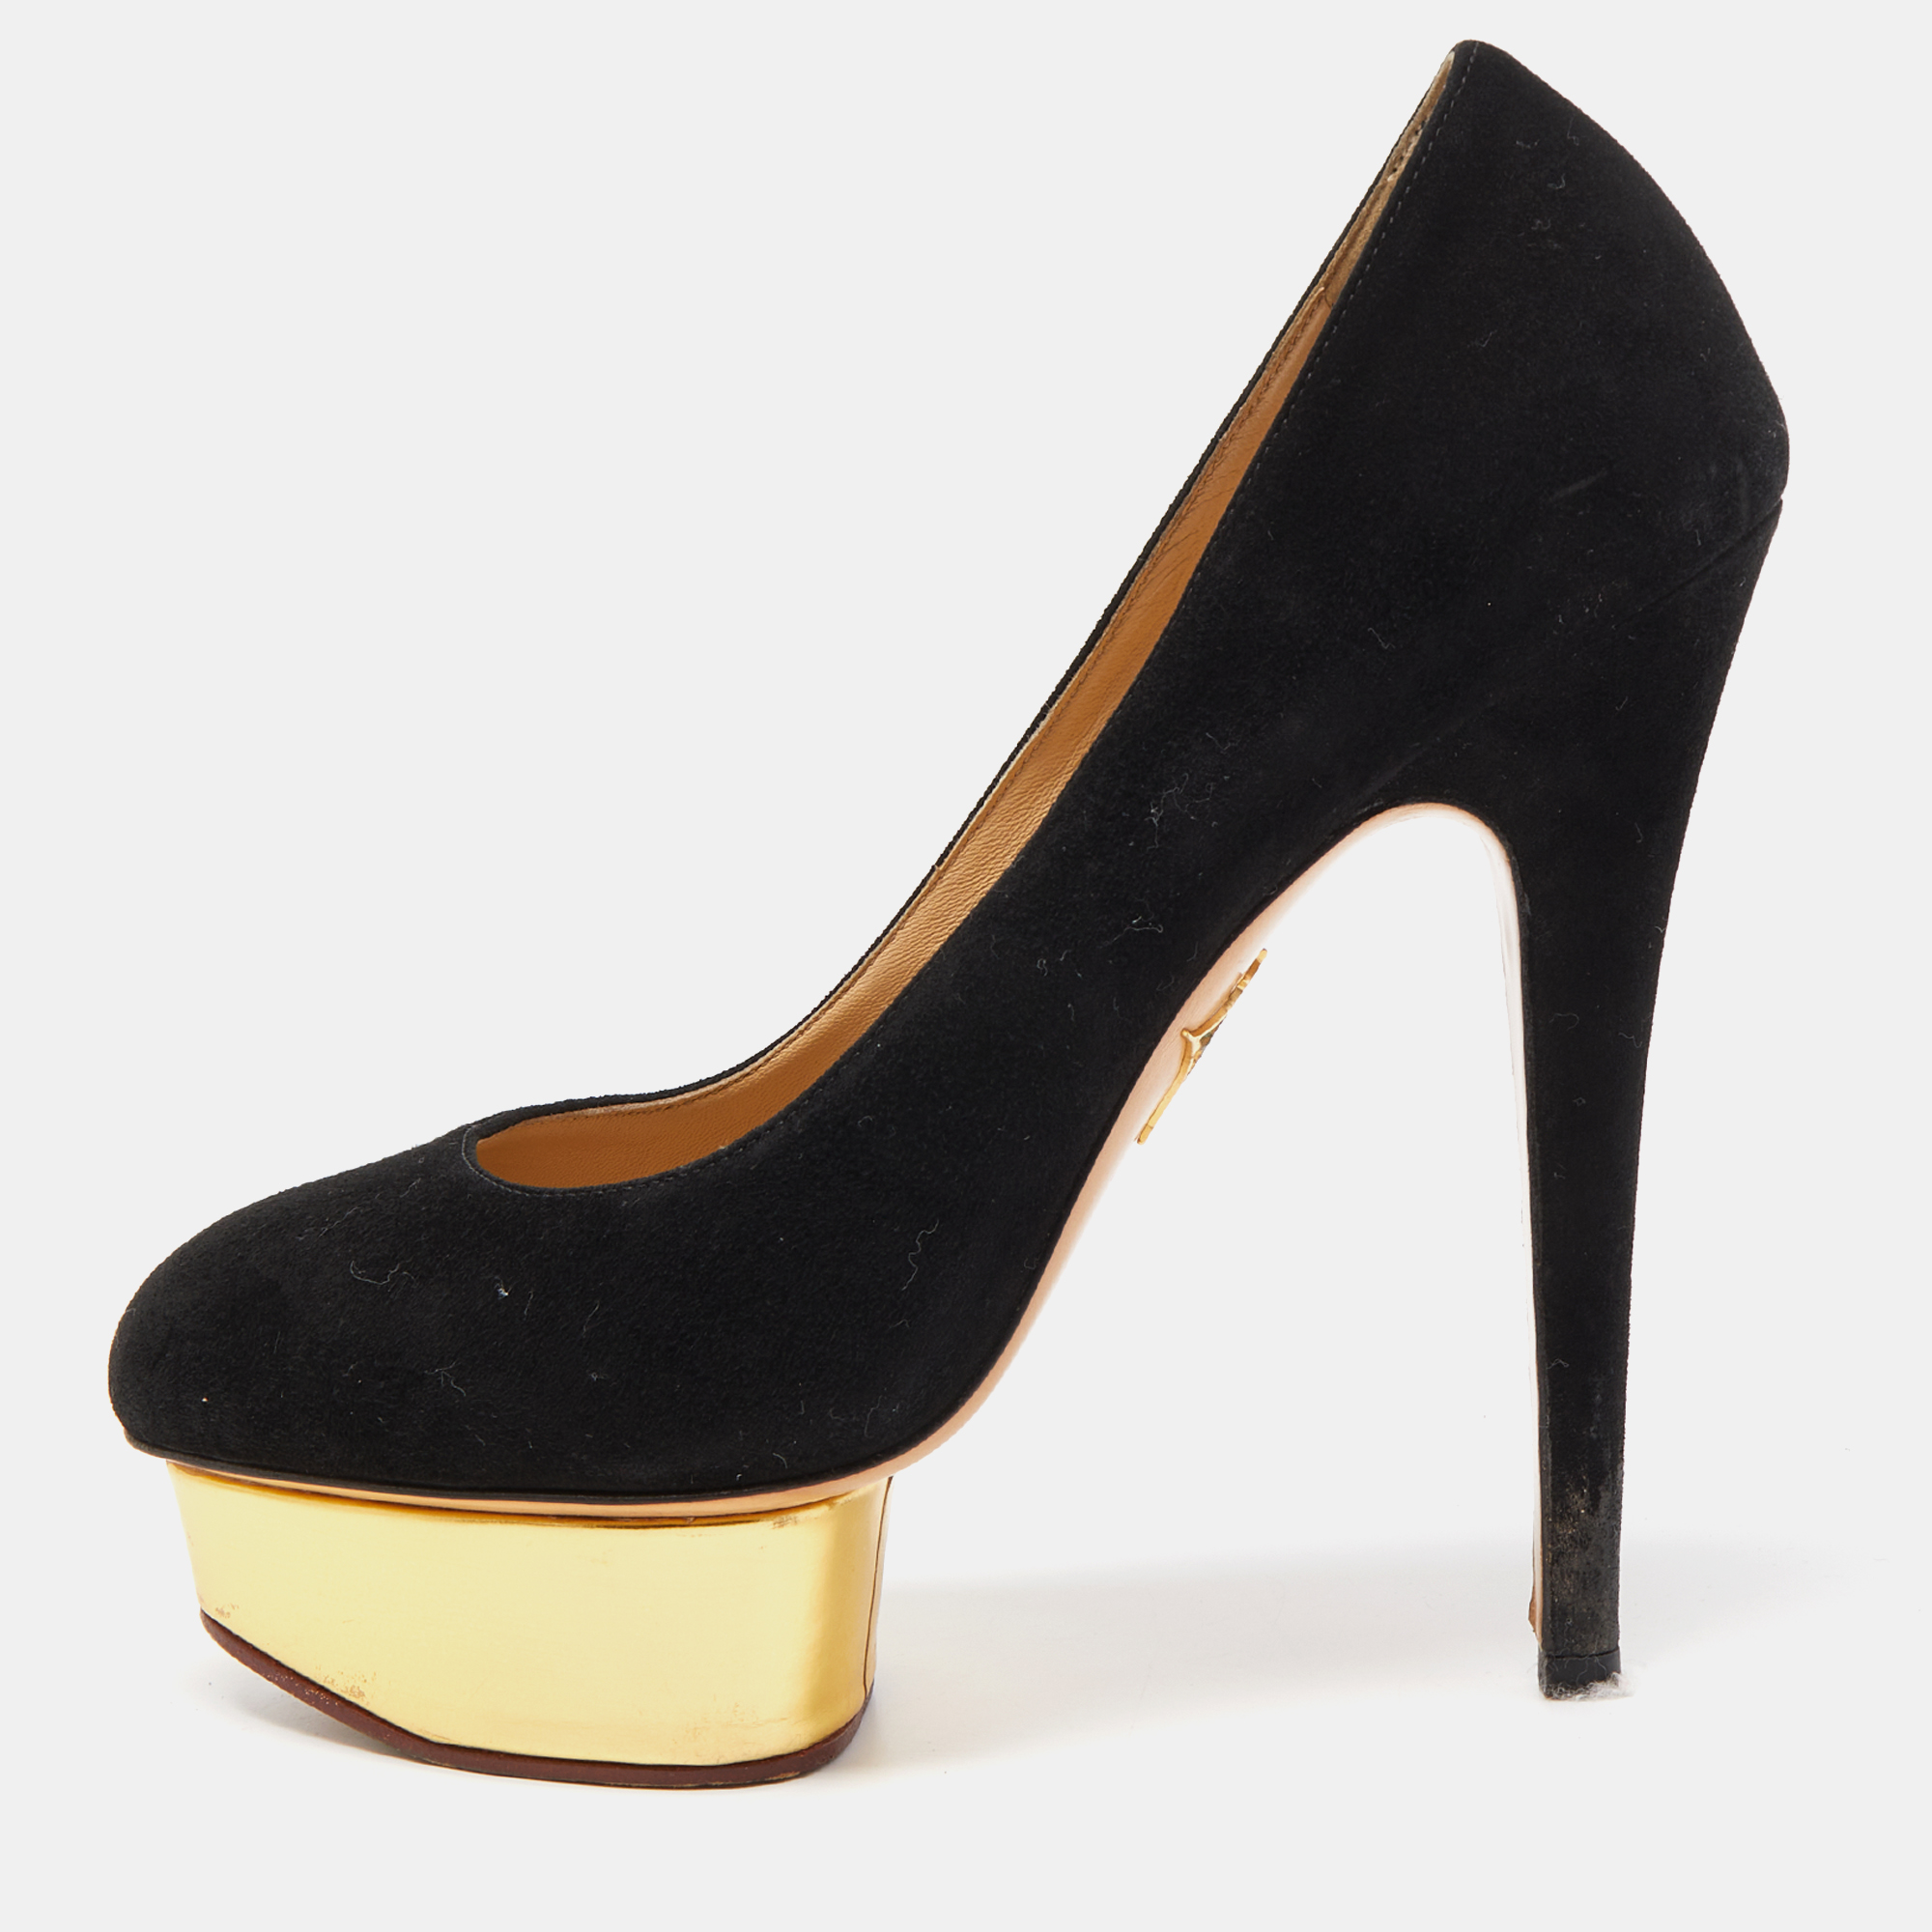 Pre-owned Charlotte Olympia Black Suede Dolly Platform Pumps Size 37.5